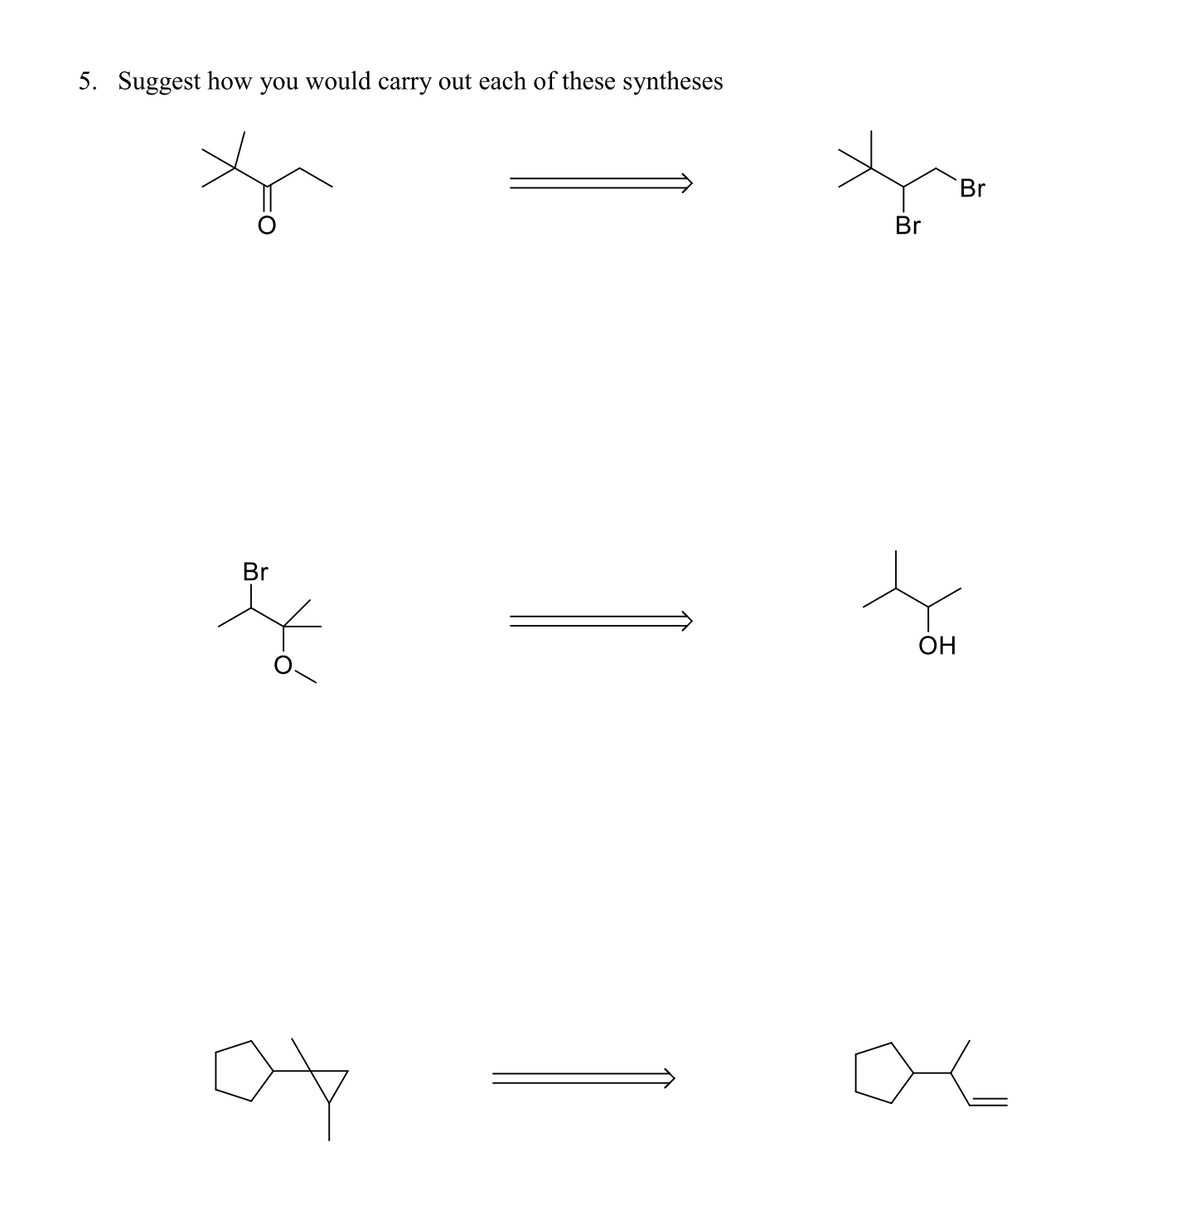 5. Suggest how you would carry out each of these syntheses
Br
Br
Br
OH
